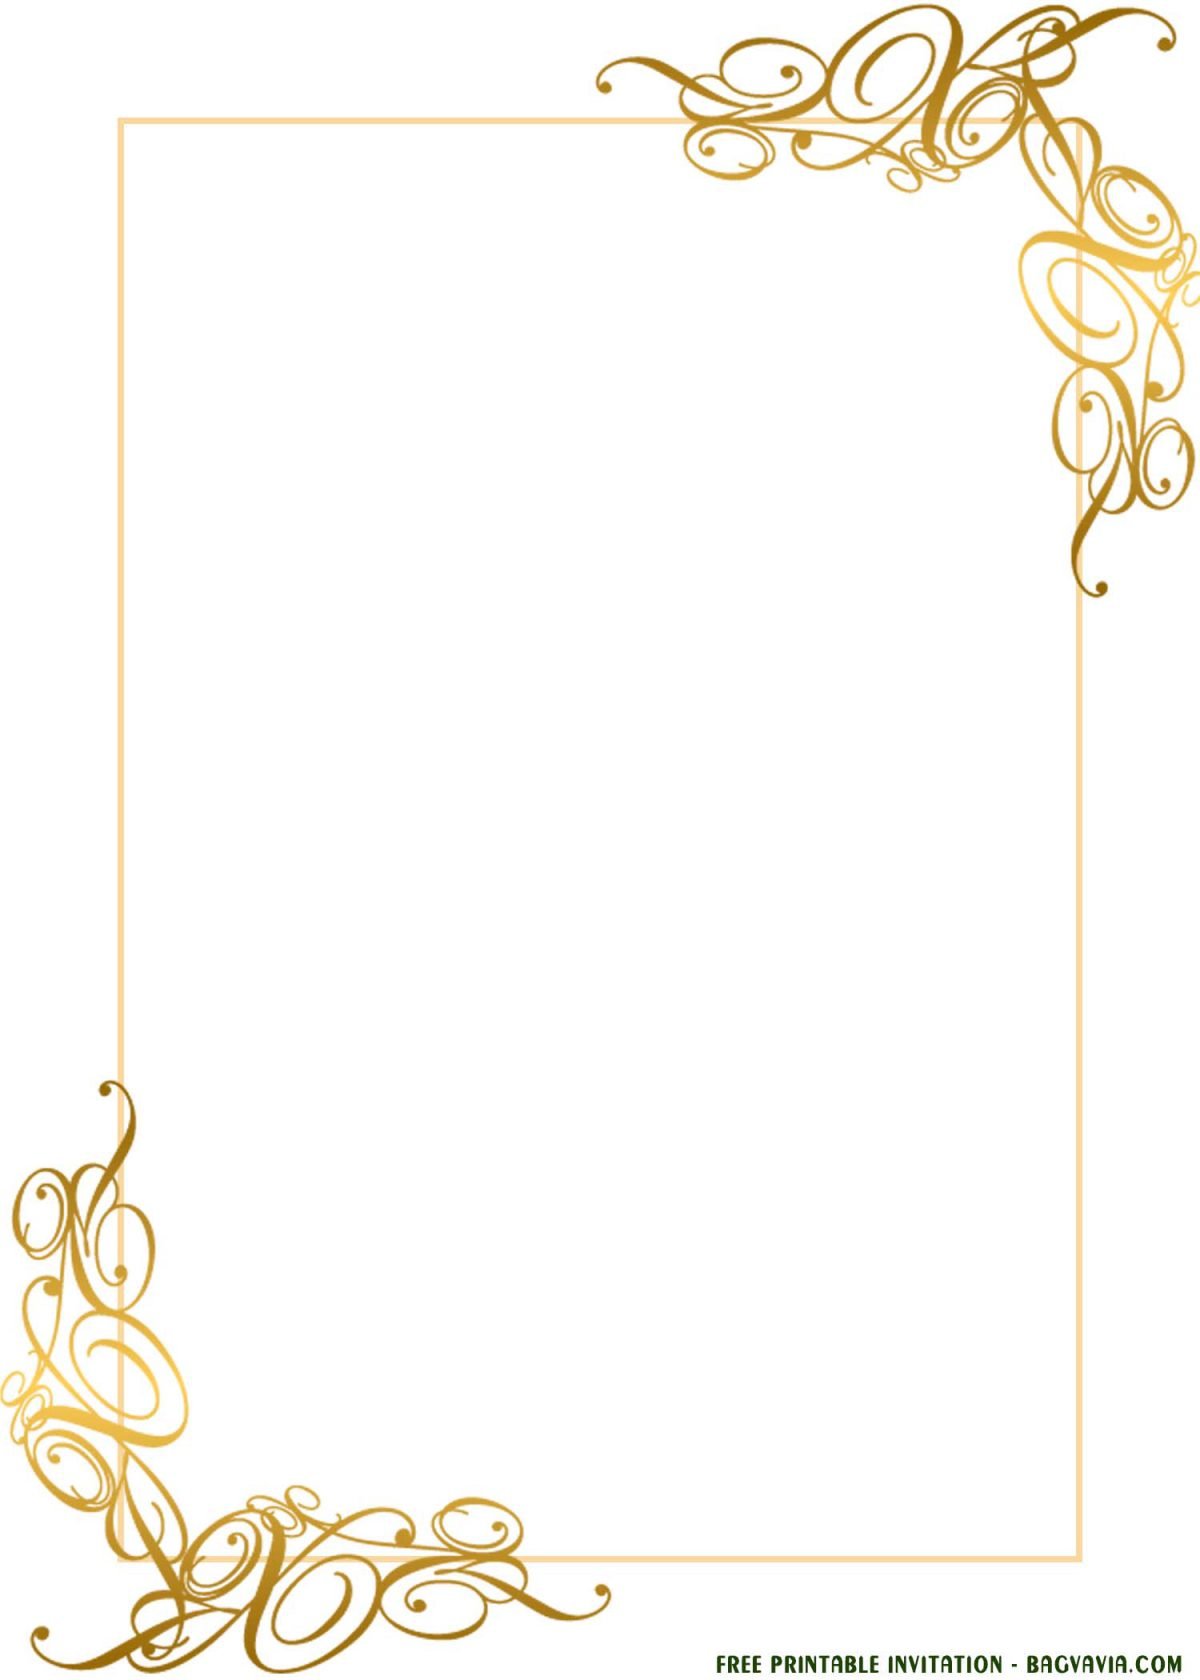 (FREE Printable) – Gold Lace Invitation Templates For Any Occasions ...